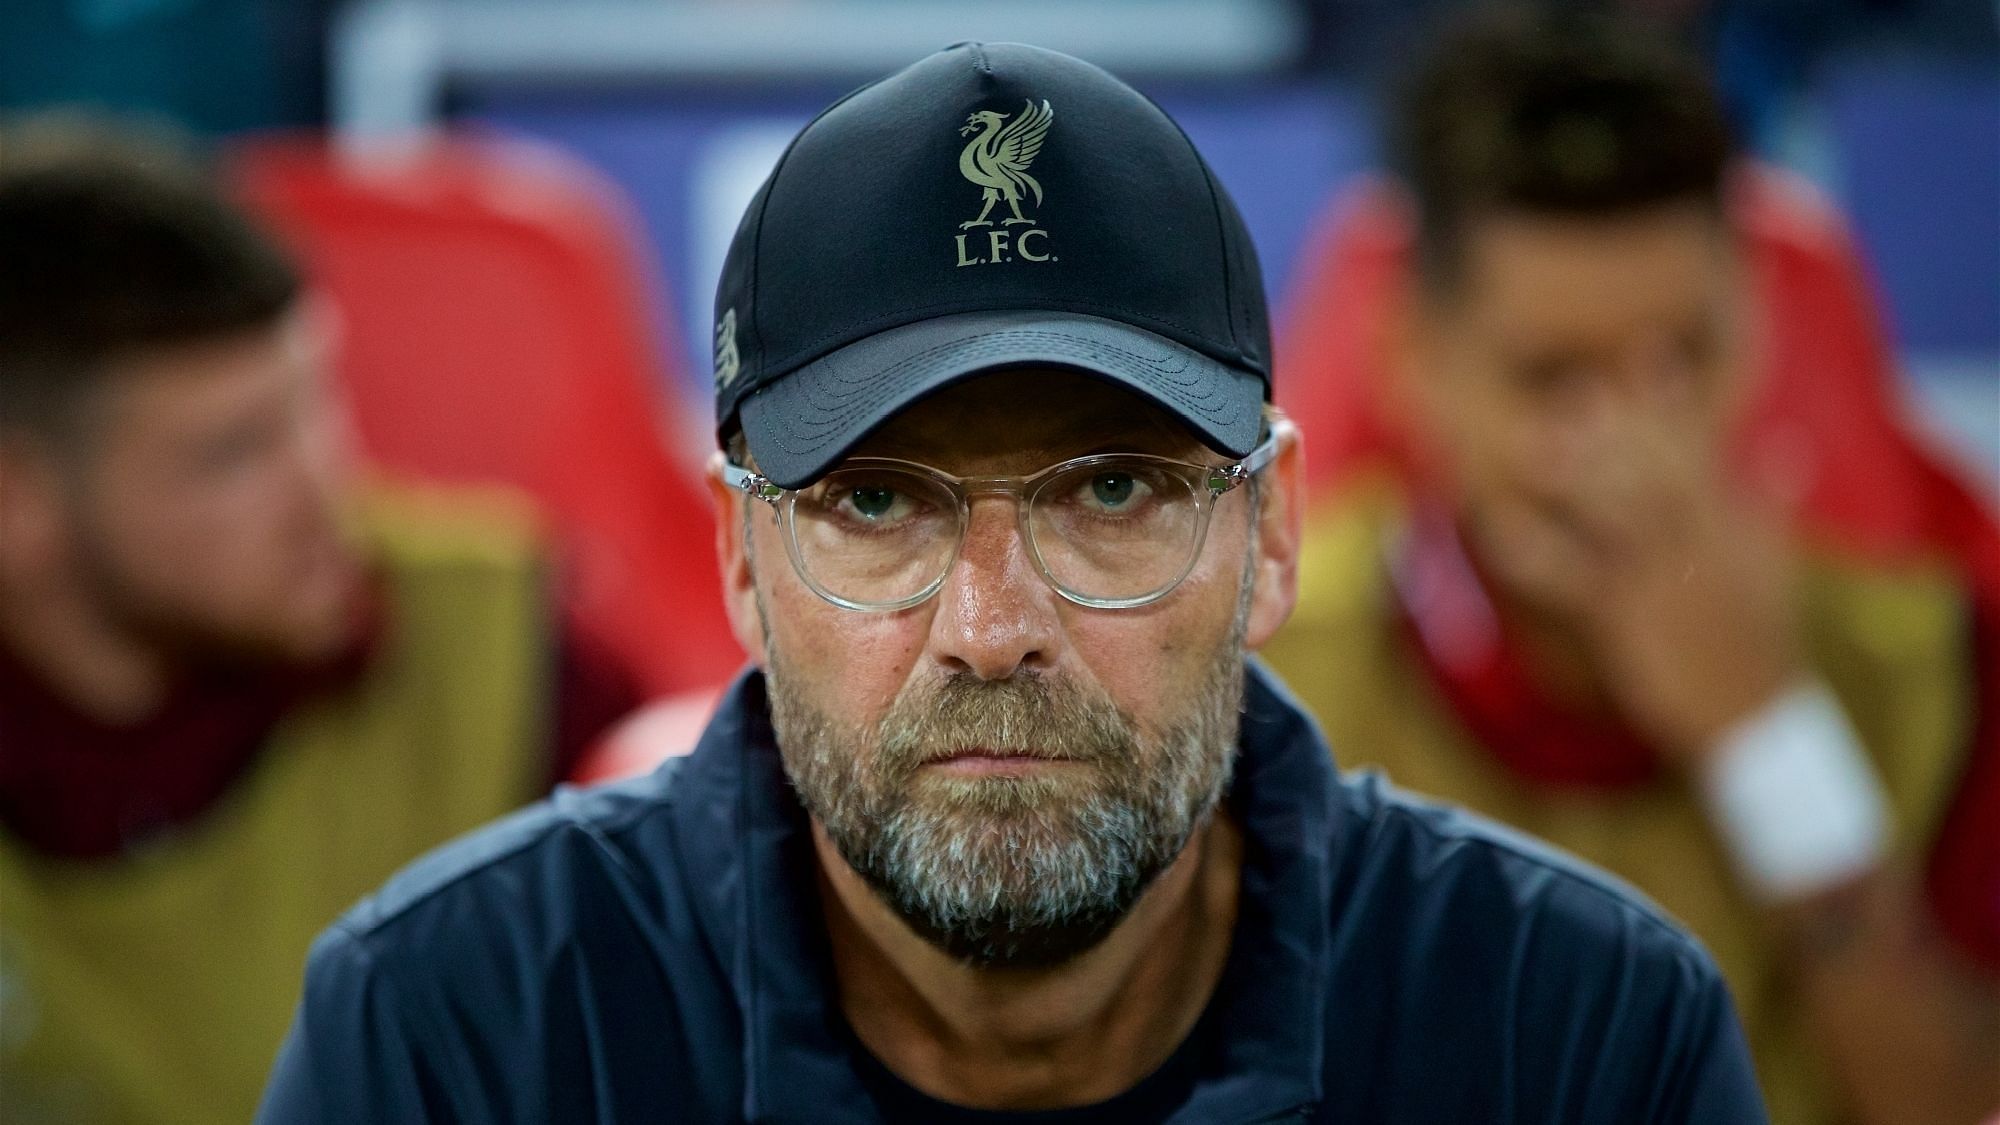 Liverpool coach Jurgen Klopp leads the voices among the football community to speak out against the proposed Super League.